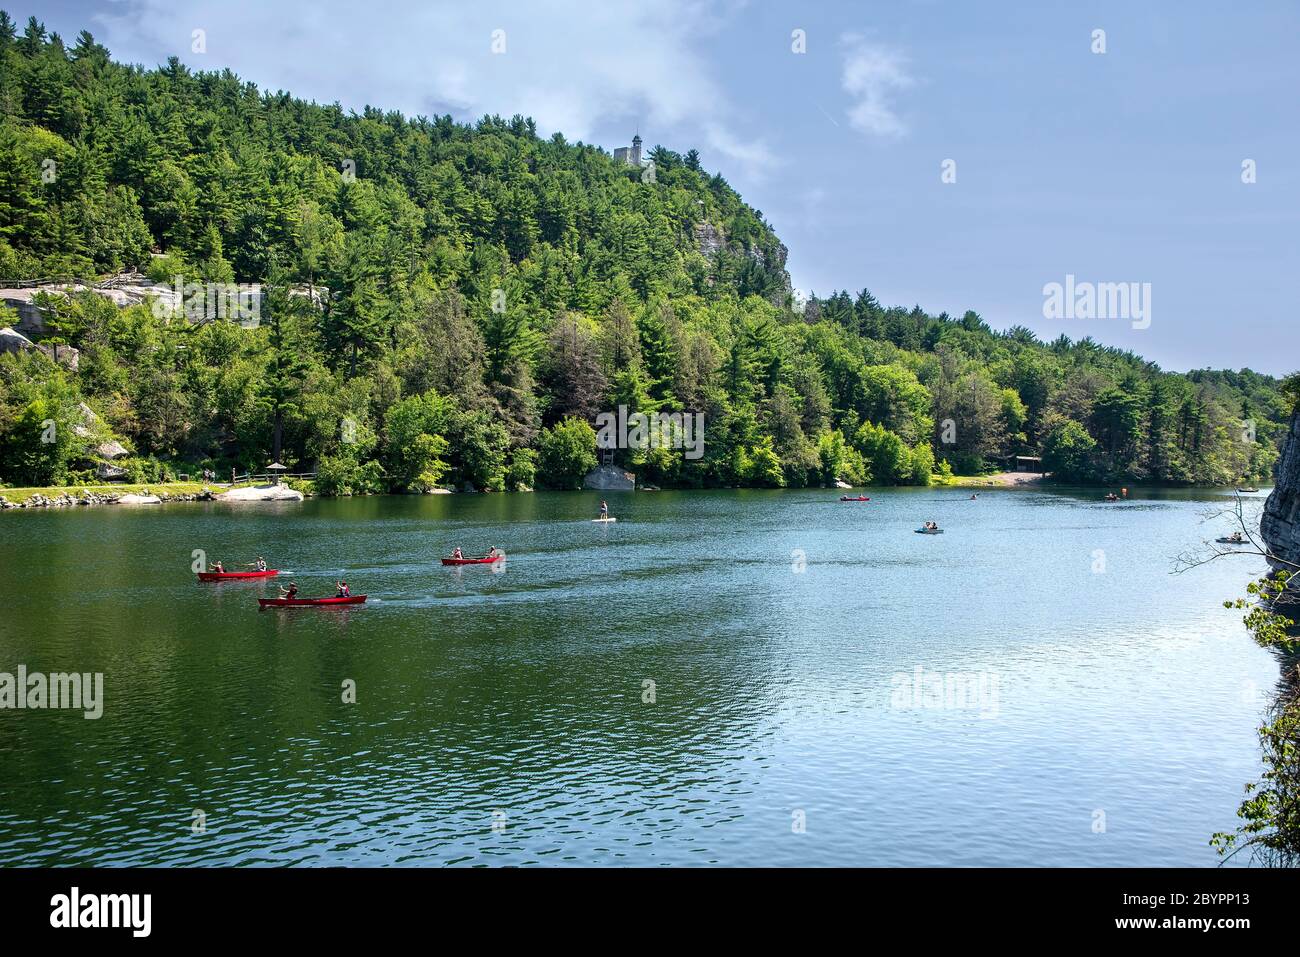 New Paltz, New York - July 11, 2015:  Hotel guests of Mohonk Mountain House boating on Mohonk Lake in upstate New York. Stock Photo